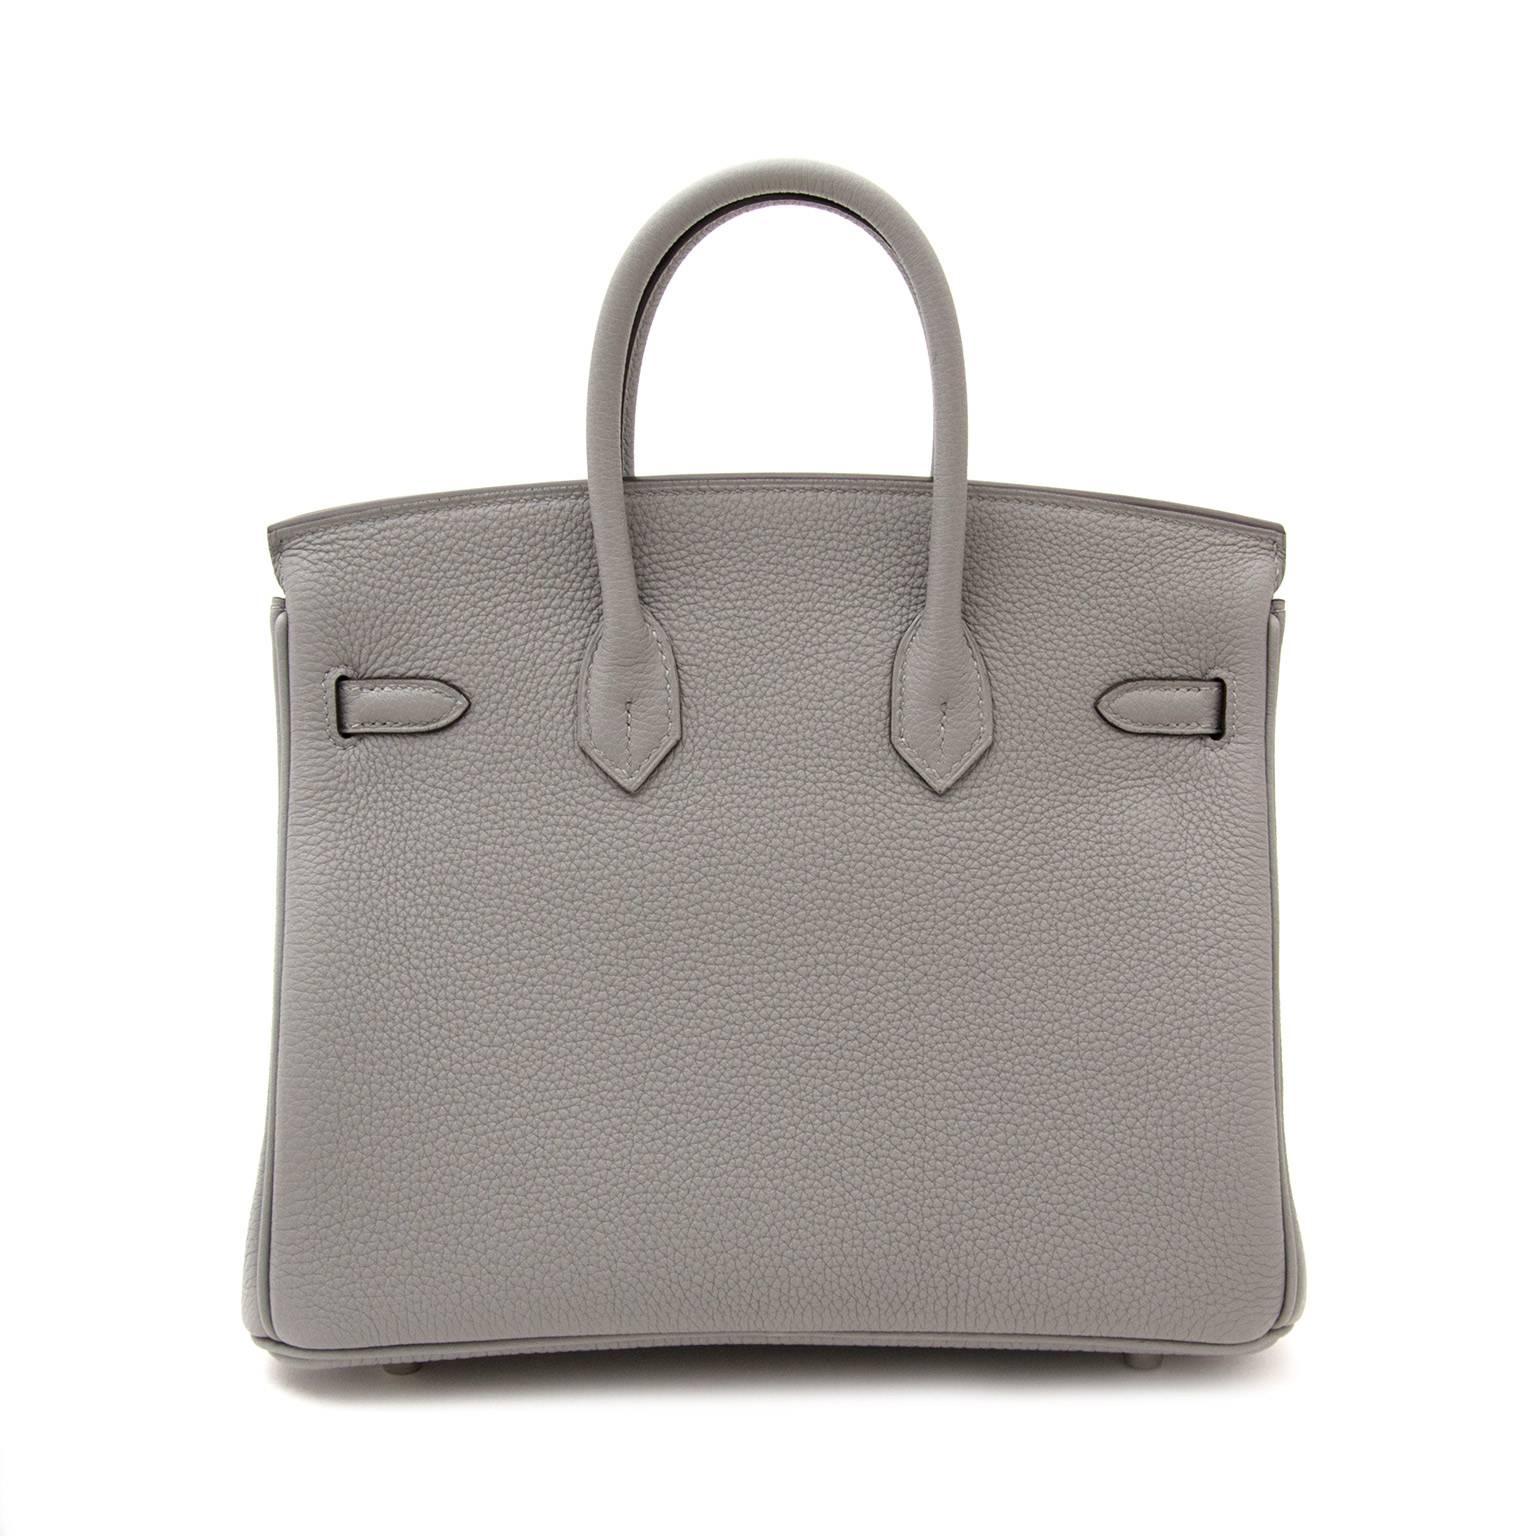 Brand New Hermès Birkin bag in soft and smooth Togo leather. The exquisite new gris mouette color and palladium hardware make each other pop!
(new color from 2015-2016 collection).

The size of this petite Hermès Birkin bag is what makes it